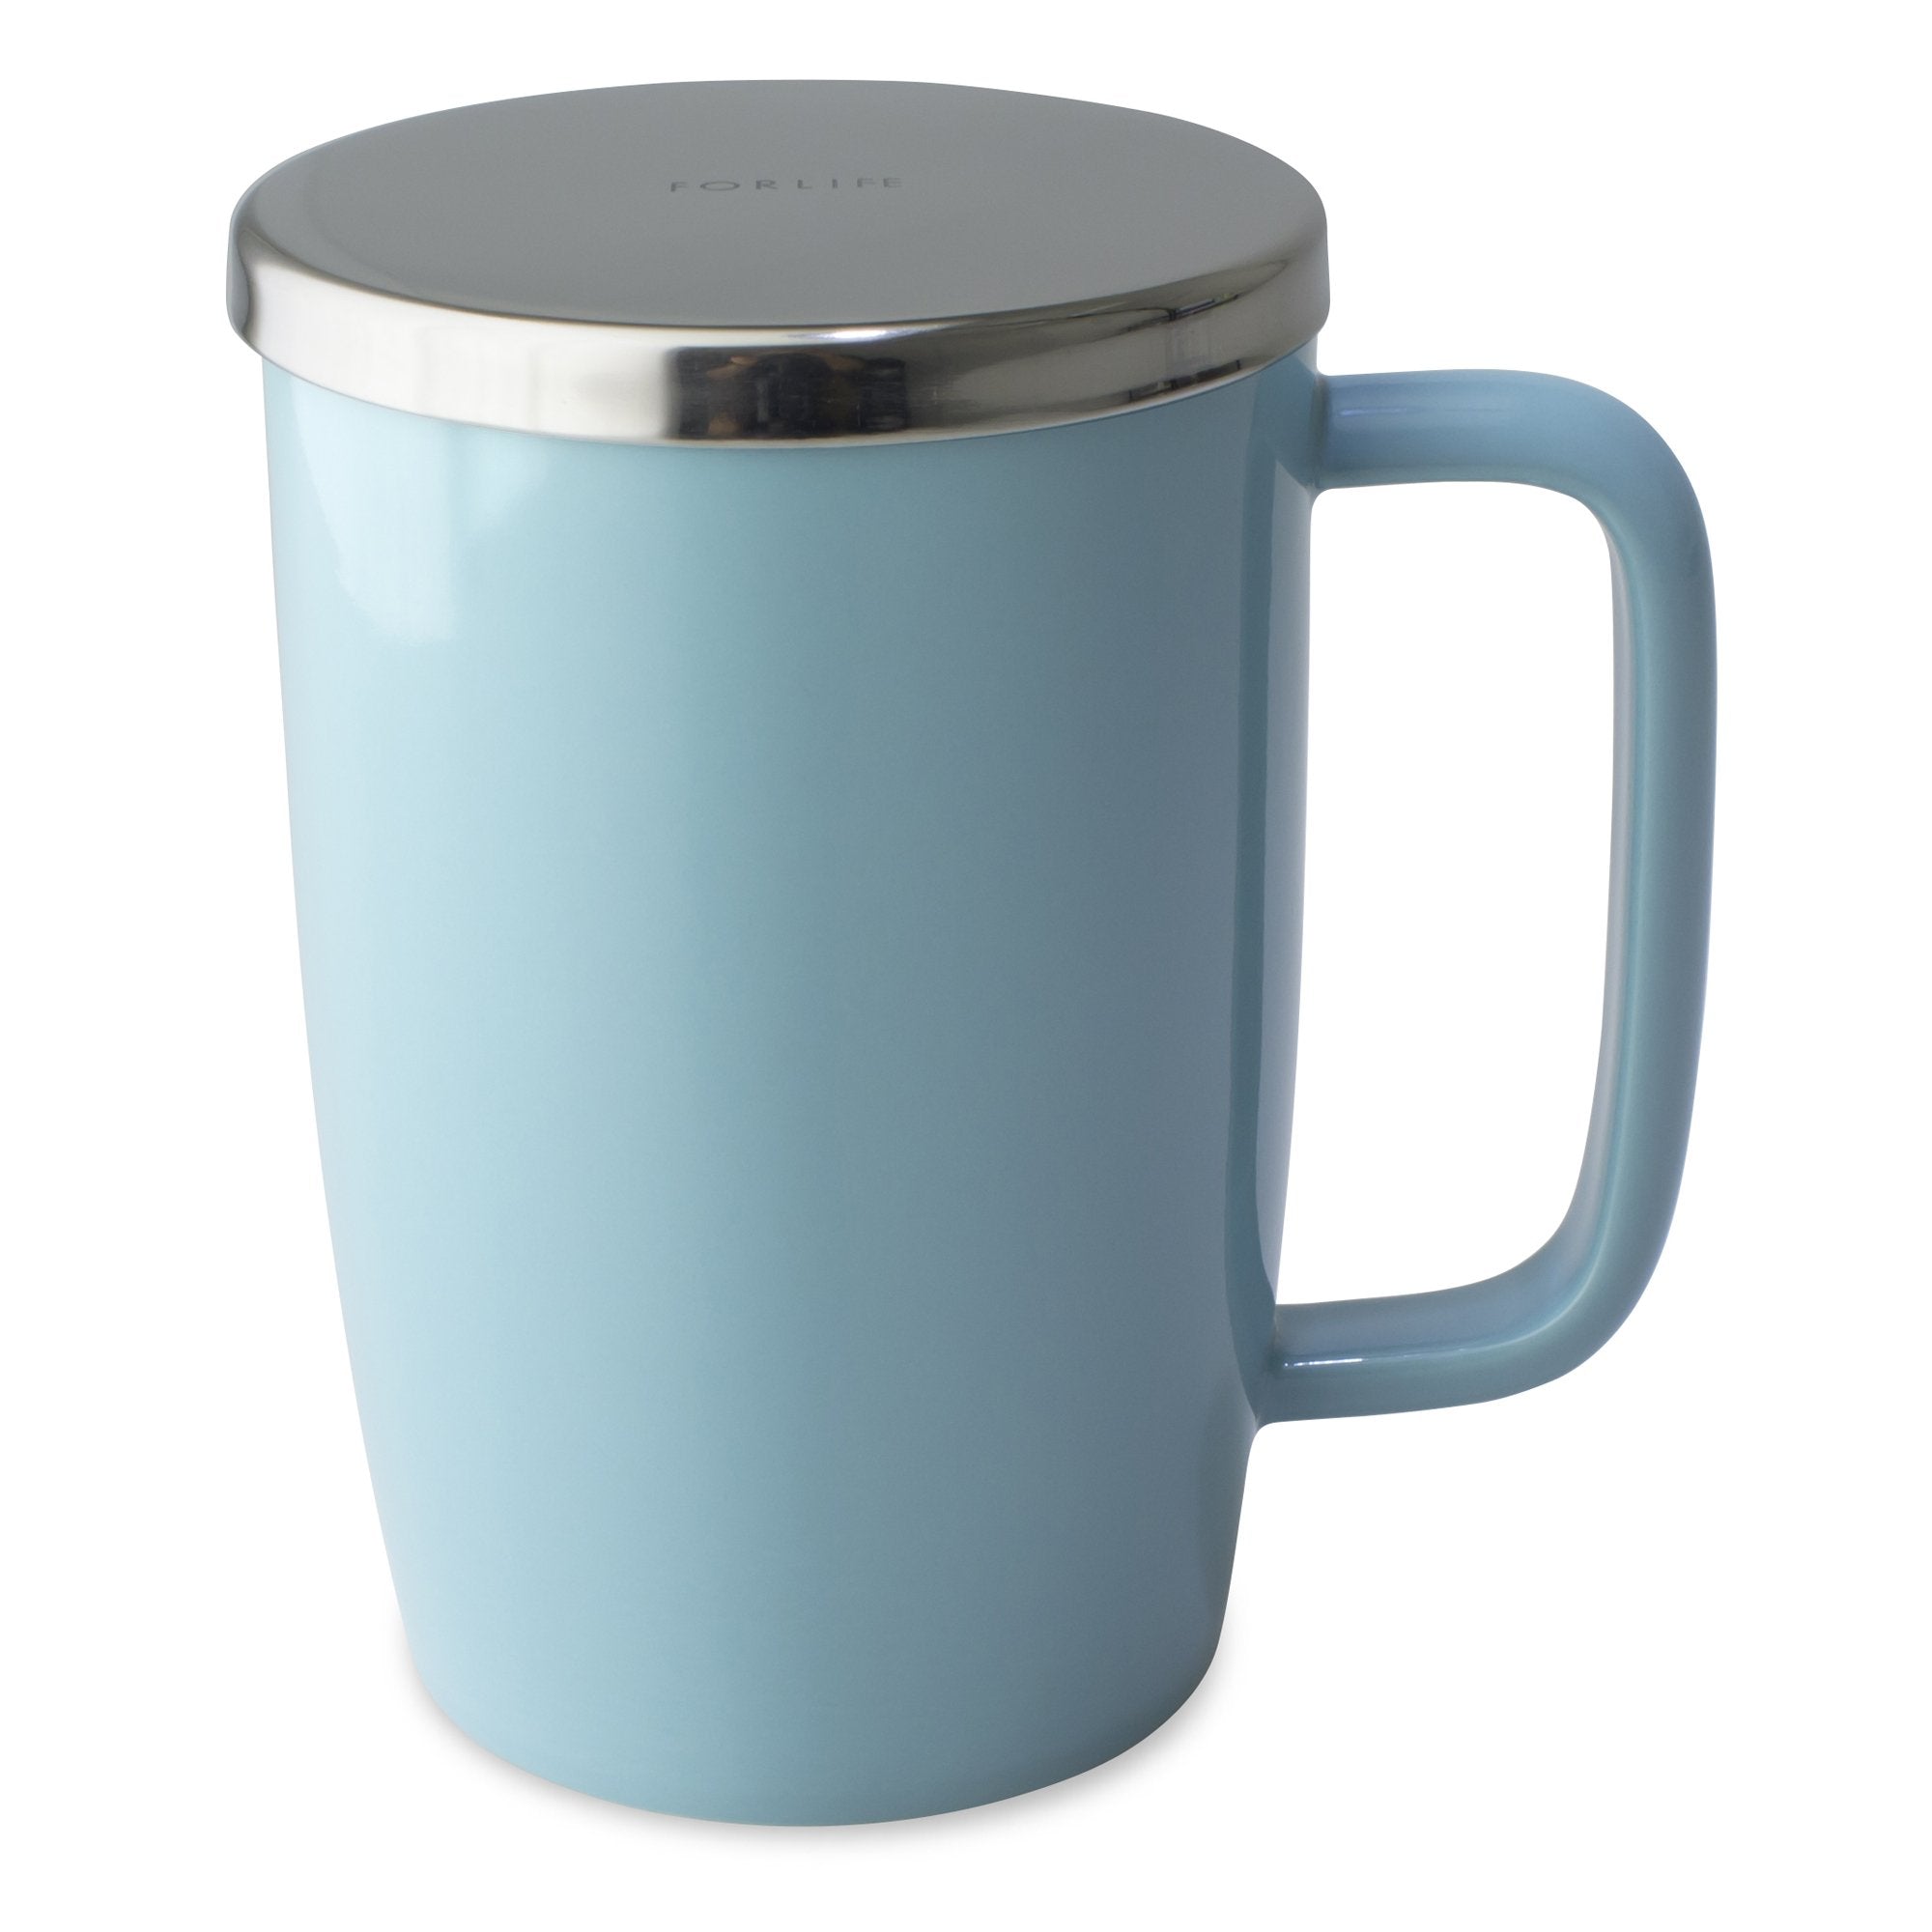 TeaLula 18 oz turquoise colored glossy surface finish mug with large thin rectangle handle and shiny stainless steel lid